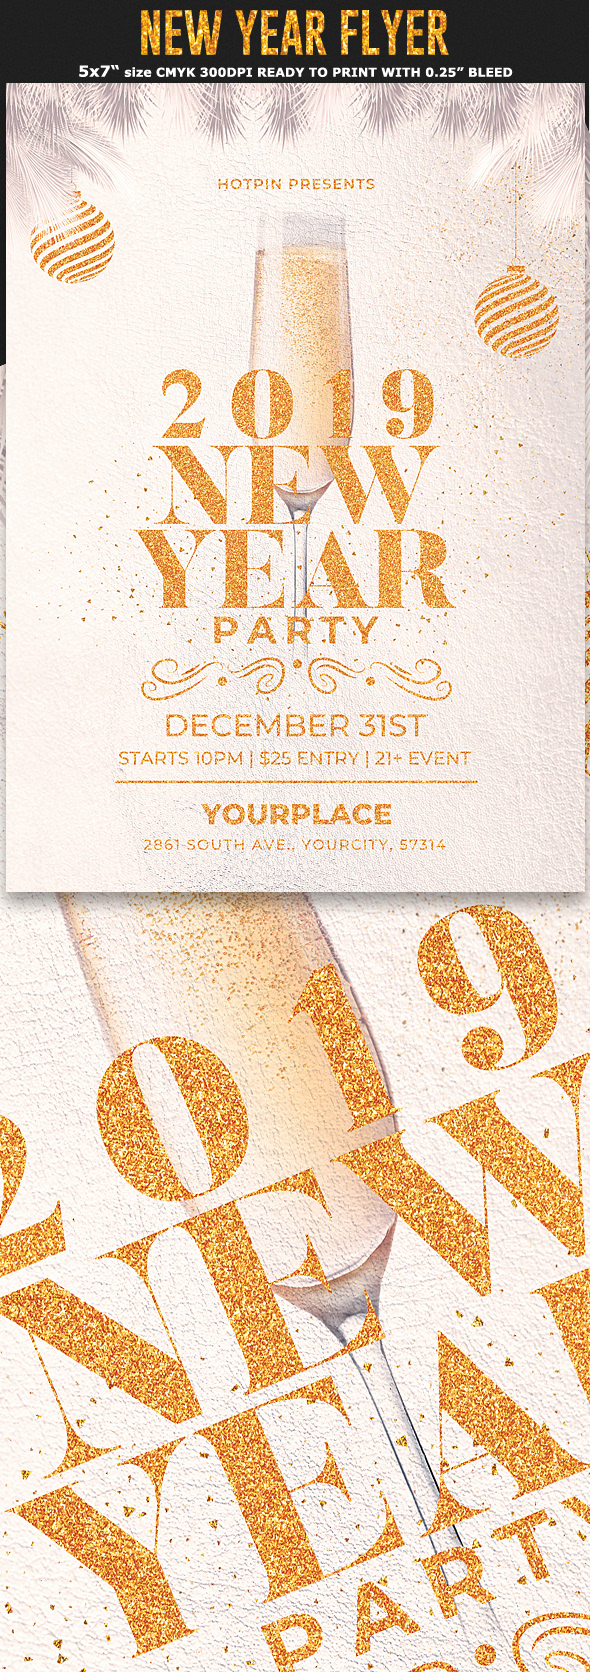 new year new year 2019 new year countdown new year invitation New Year Party flyer new years Eve nightclub Nye